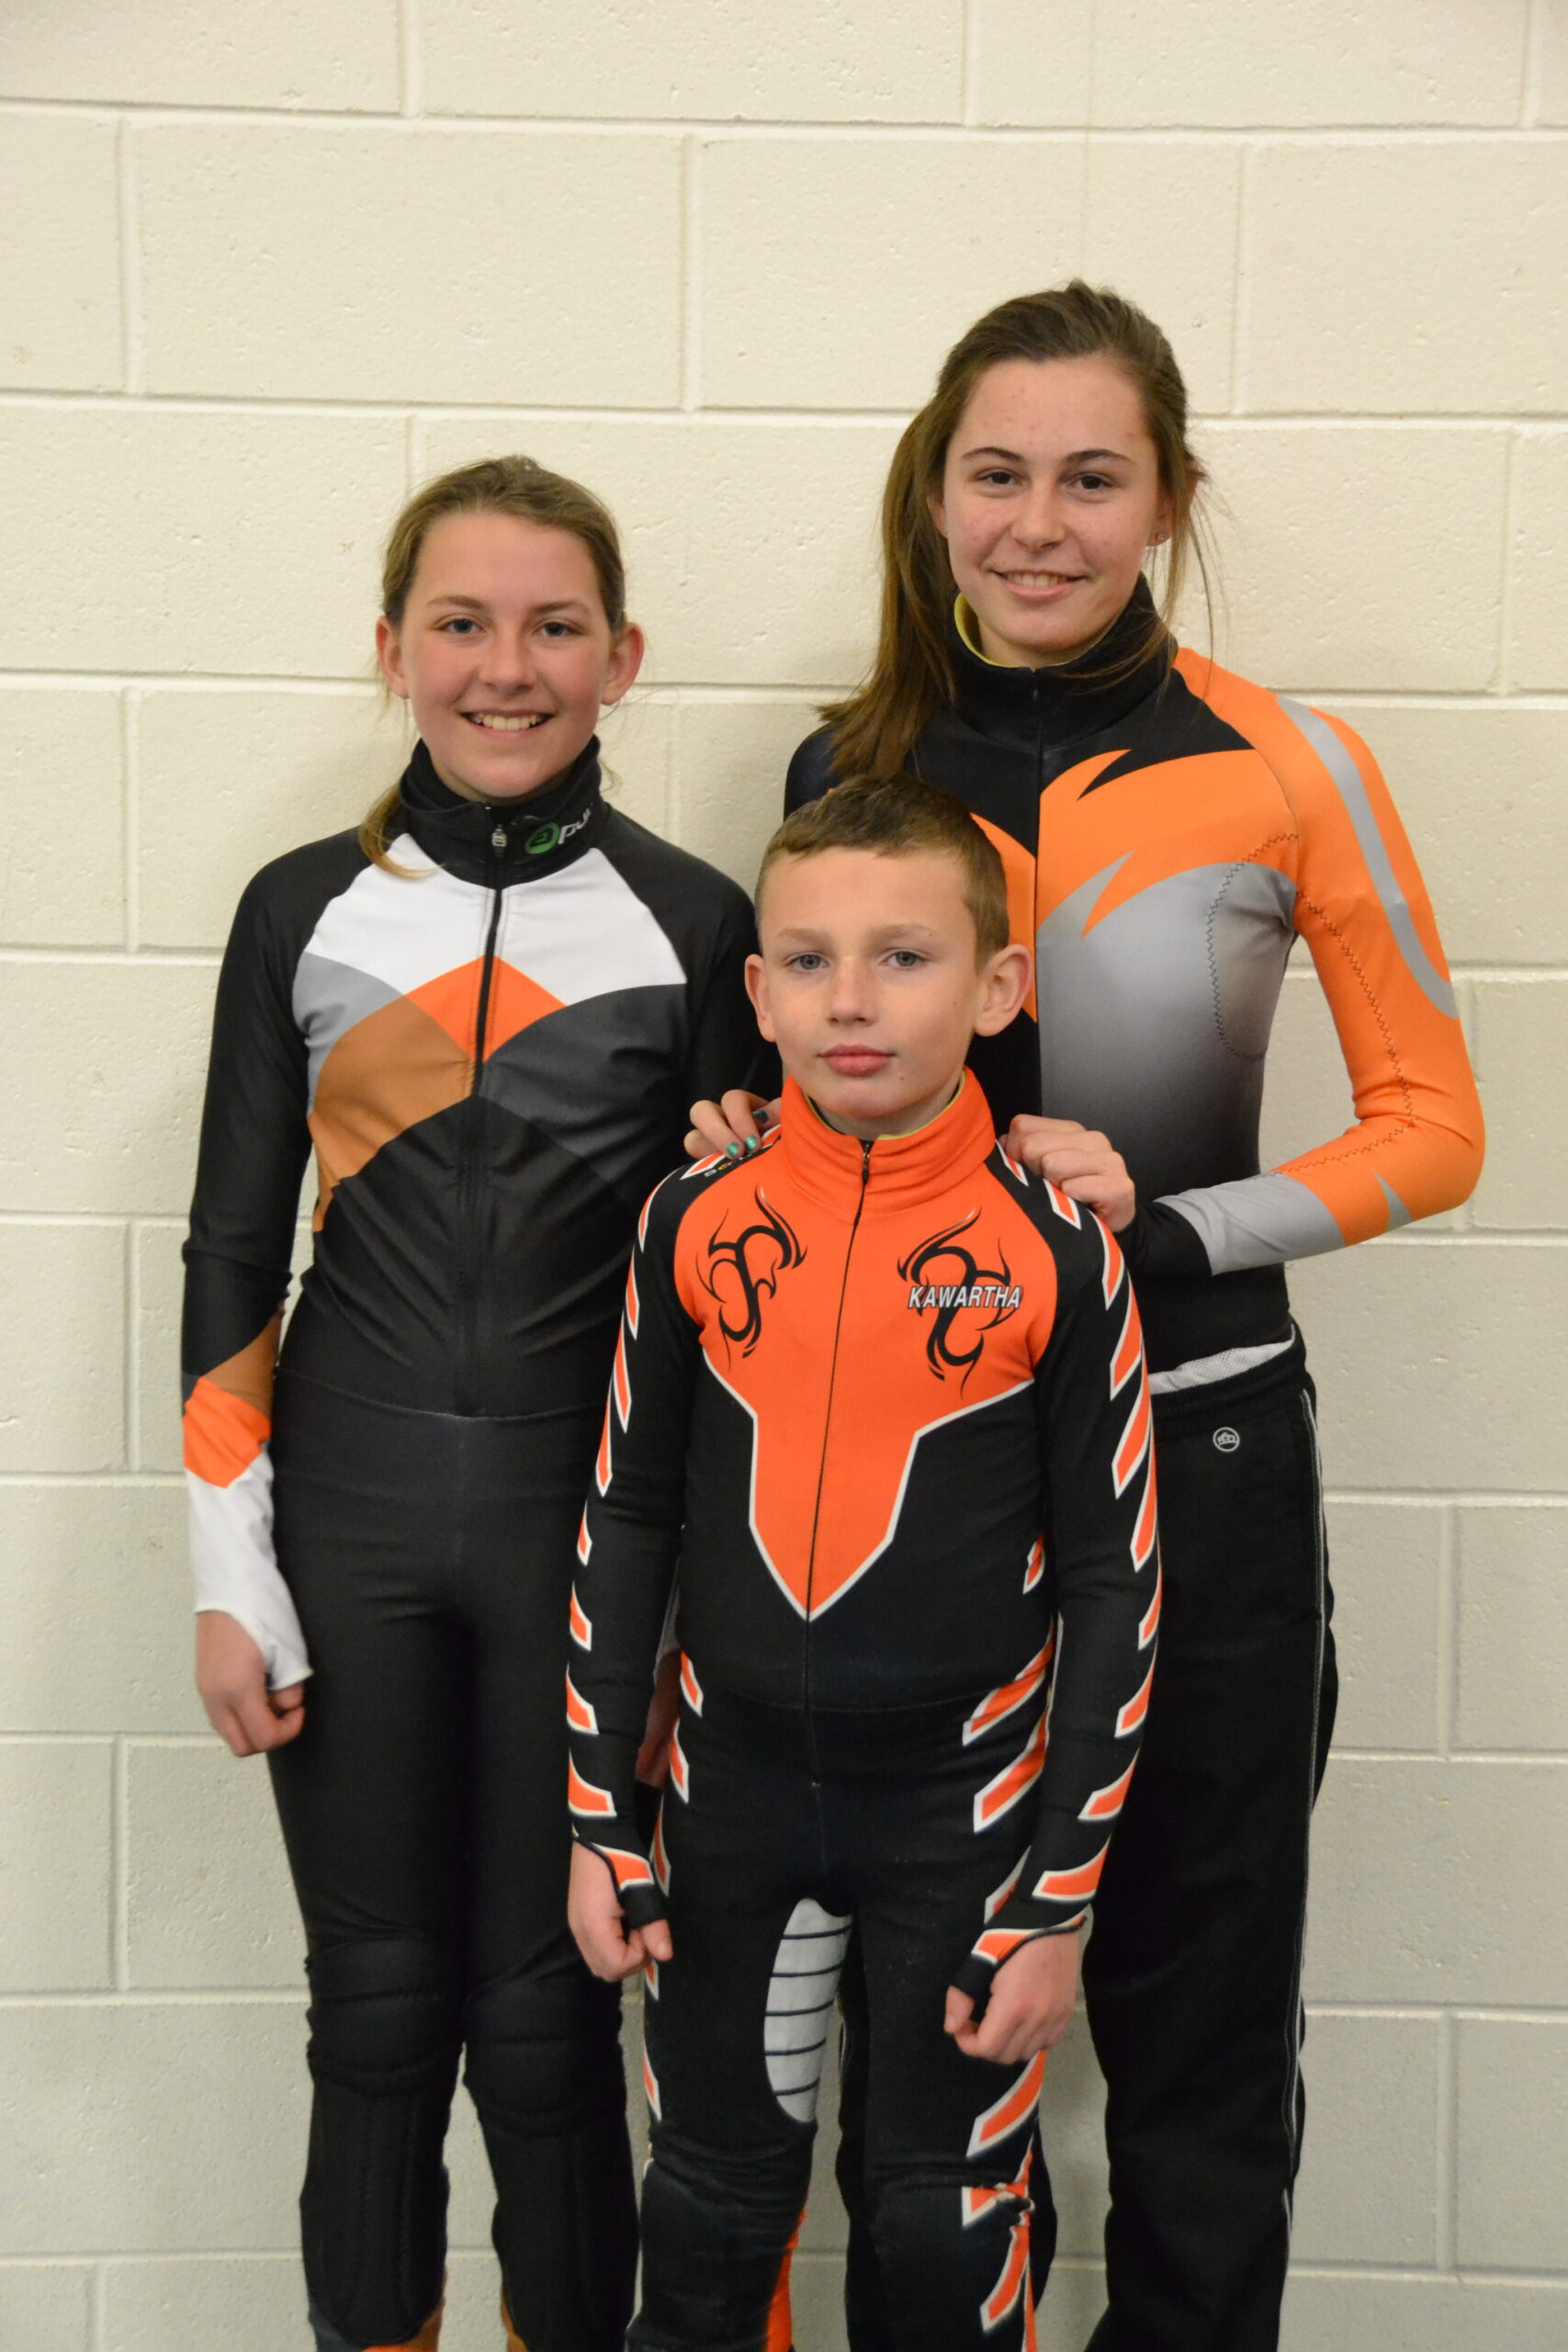 Versions of our skinsuit, including the tiger suit.